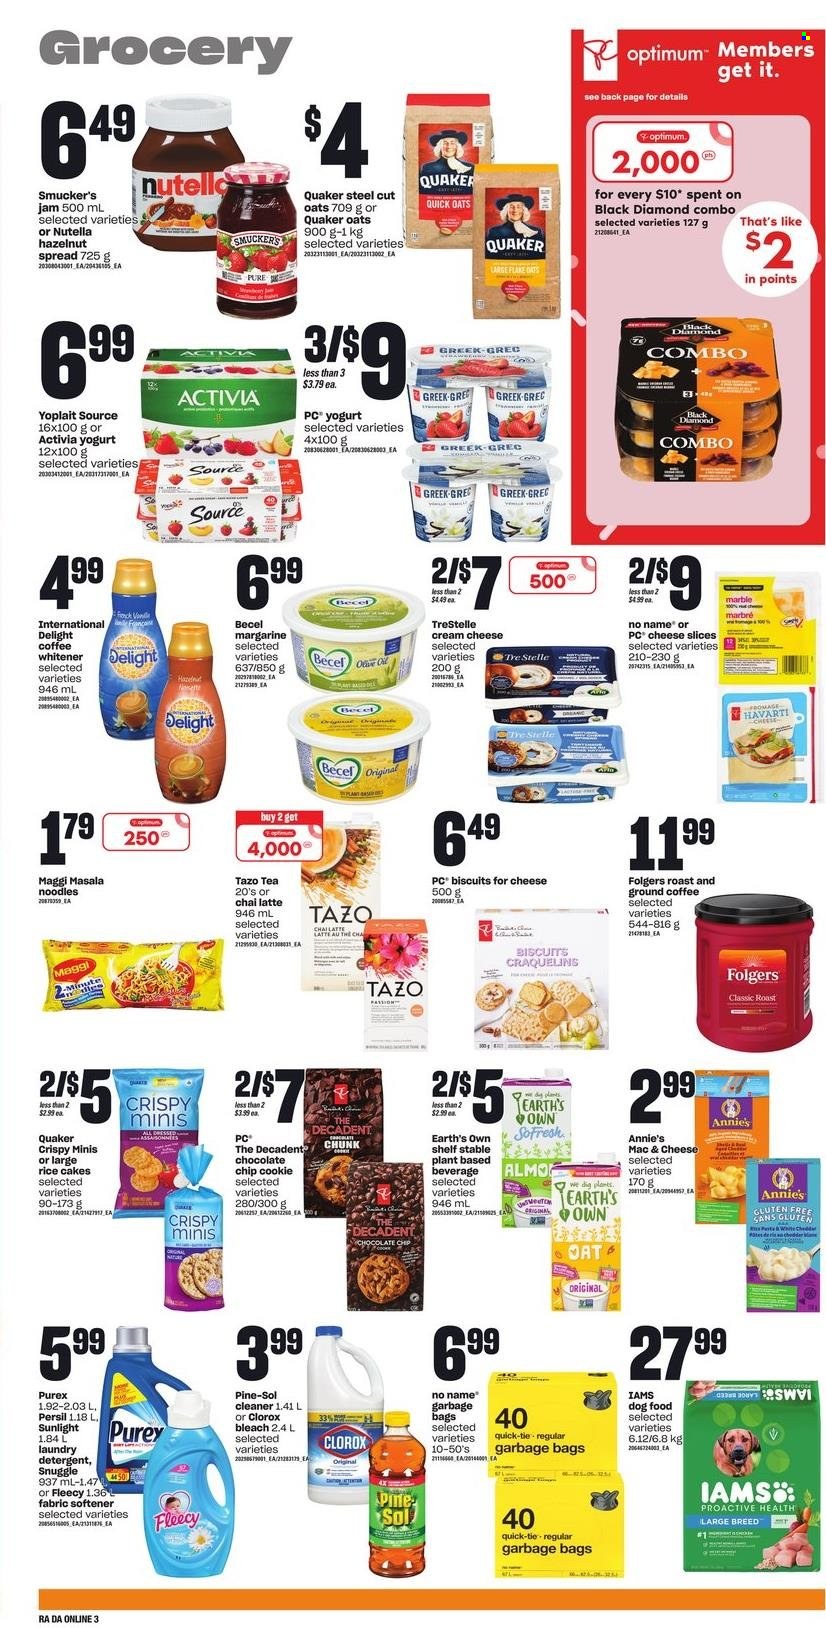 thumbnail - Dominion Flyer - January 26, 2023 - February 01, 2023 - Sales products - No Name, Quaker, noodles, Annie's, cream cheese, sliced cheese, Havarti, yoghurt, Activia, Yoplait, margarine, biscuit, oats, Maggi, Quick Oats, fruit jam, hazelnut spread, tea, Folgers, ground coffee, cleaner, bleach, Clorox, Pine-Sol, Snuggle, Persil, fabric softener, laundry detergent, Sunlight, Purex, bag, animal food, dog food, Optimum, Iams, paint, tent, detergent, Nutella. Page 11.